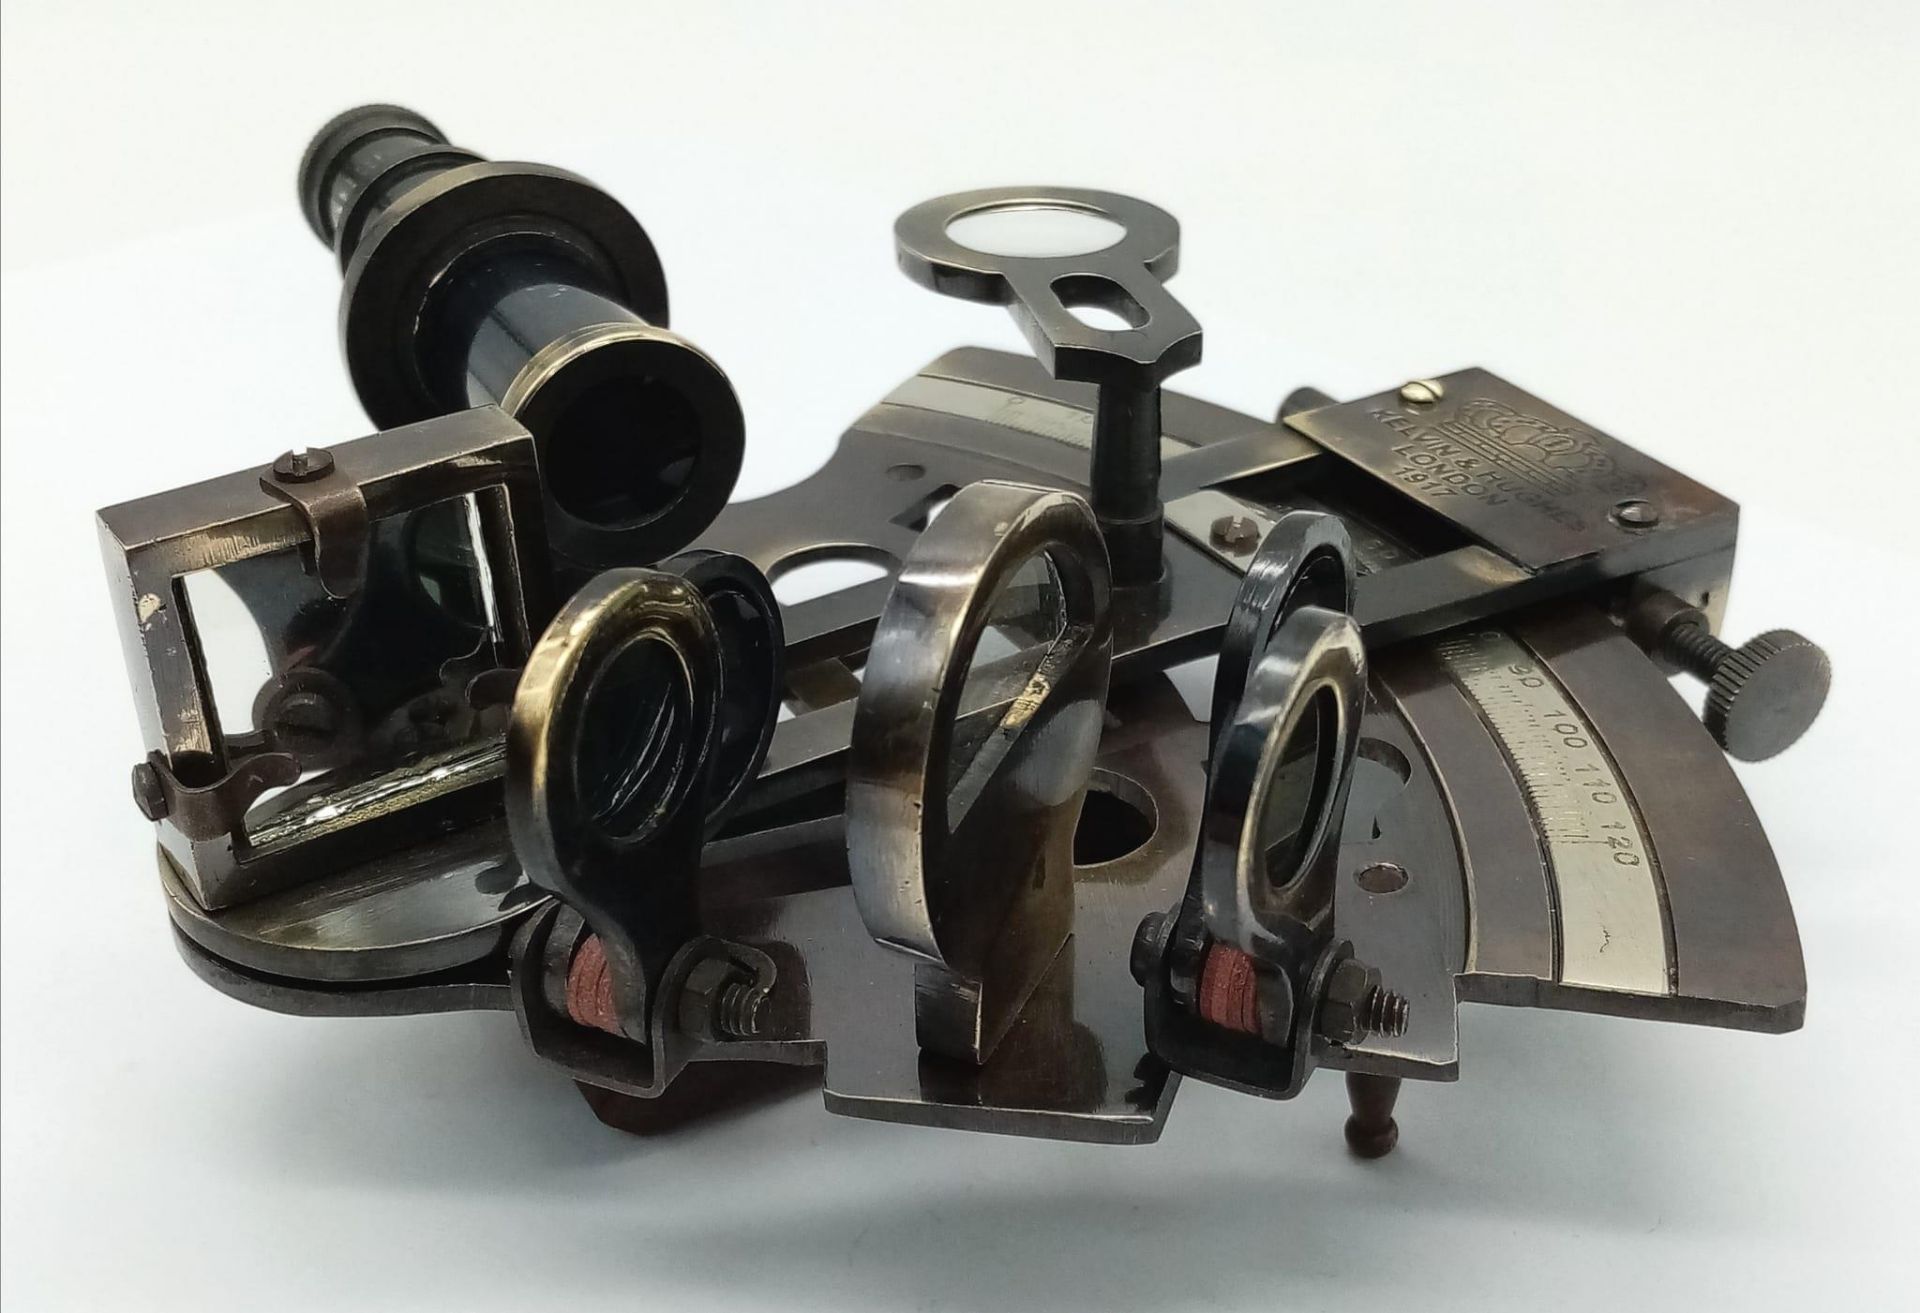 A very ornamental, brass sextant, with many moving parts and an inscription KELVIN & HUGHES LONDON - Image 2 of 5